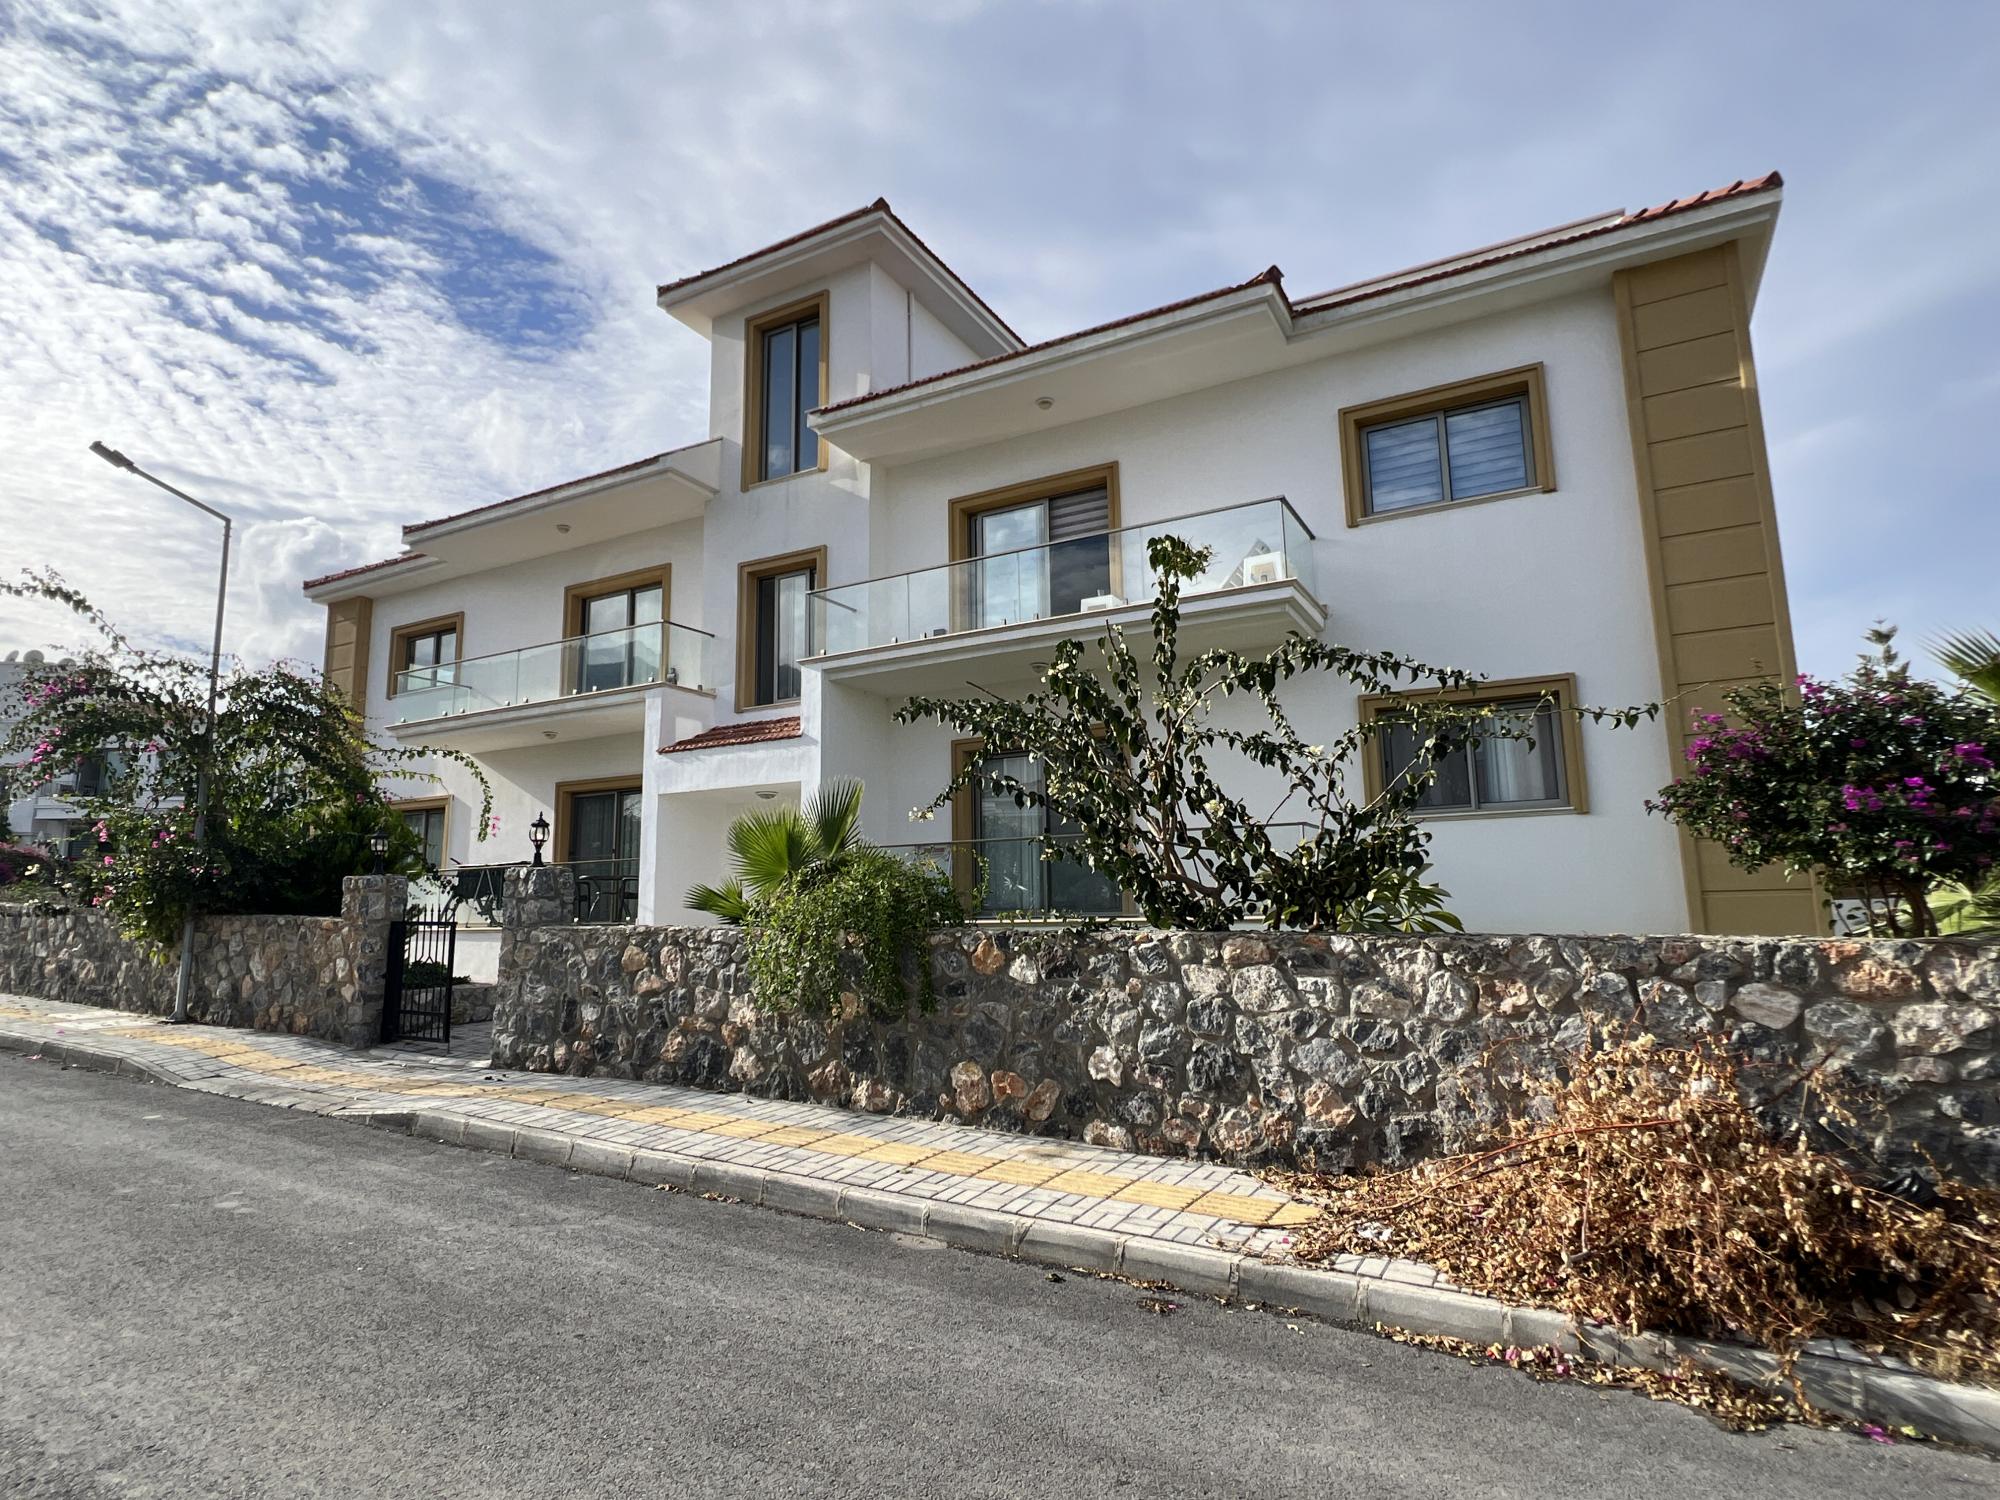 Picture of Apartment For Sale in Edremit, Girne, Northern Cyprus